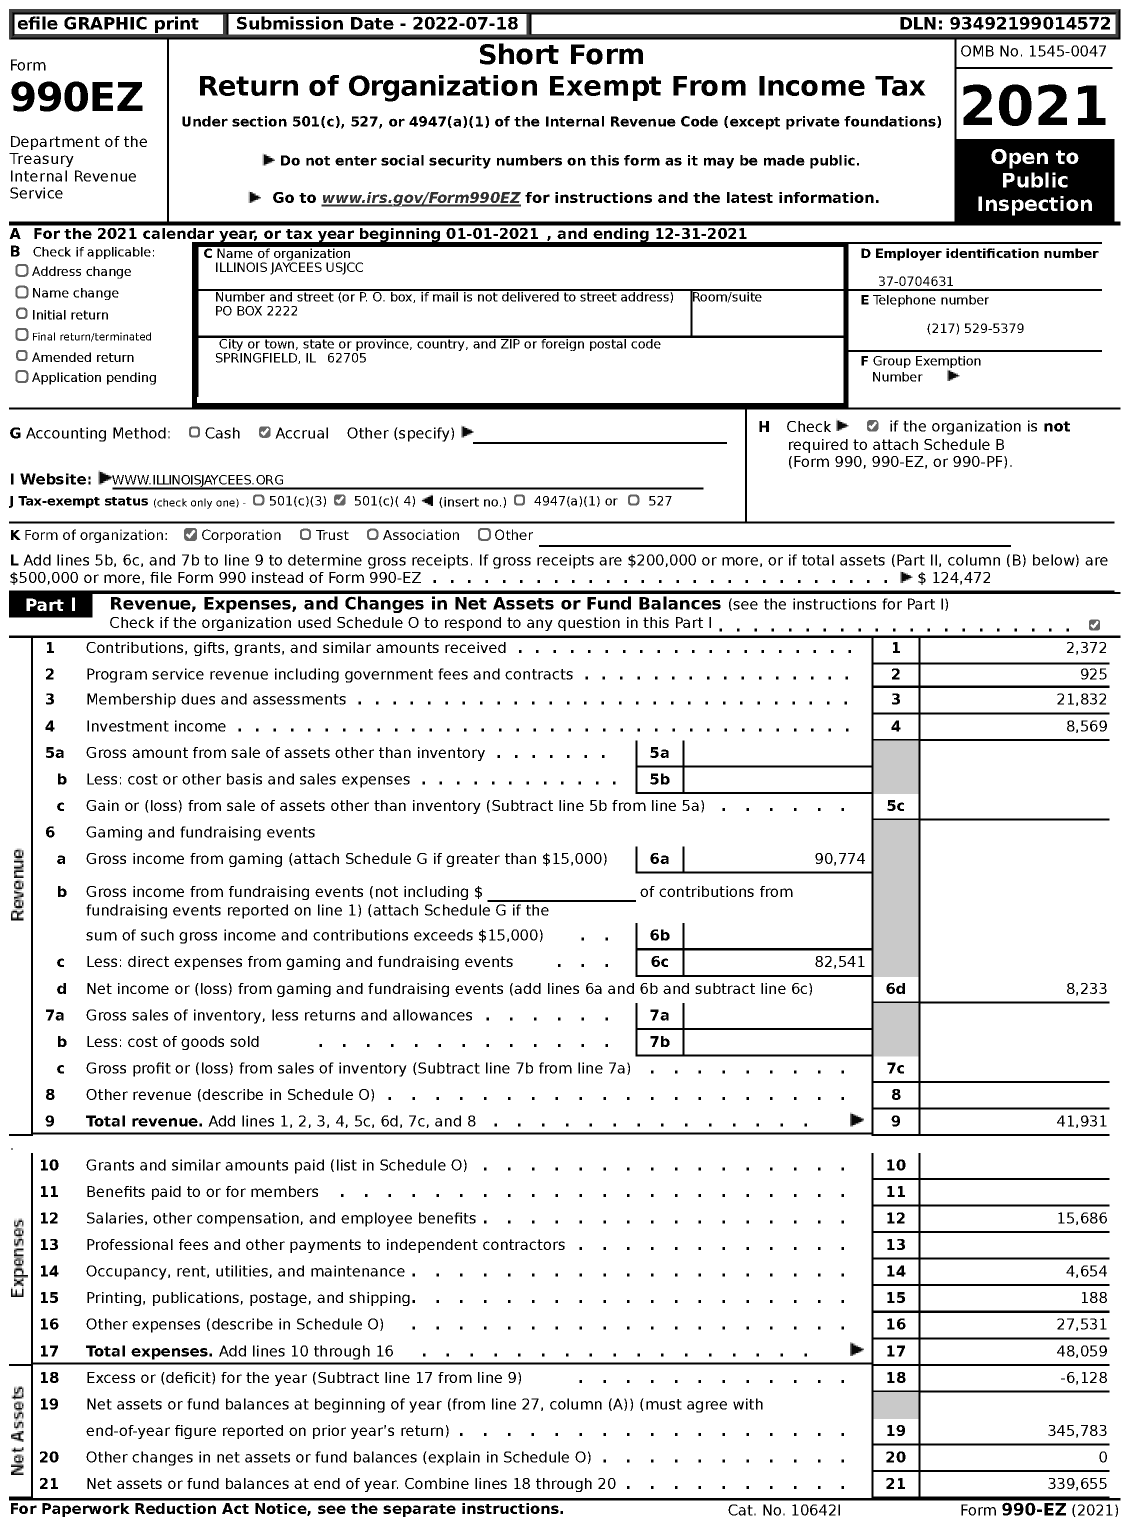 Image of first page of 2021 Form 990EZ for Illinois Jaycees Usjcc